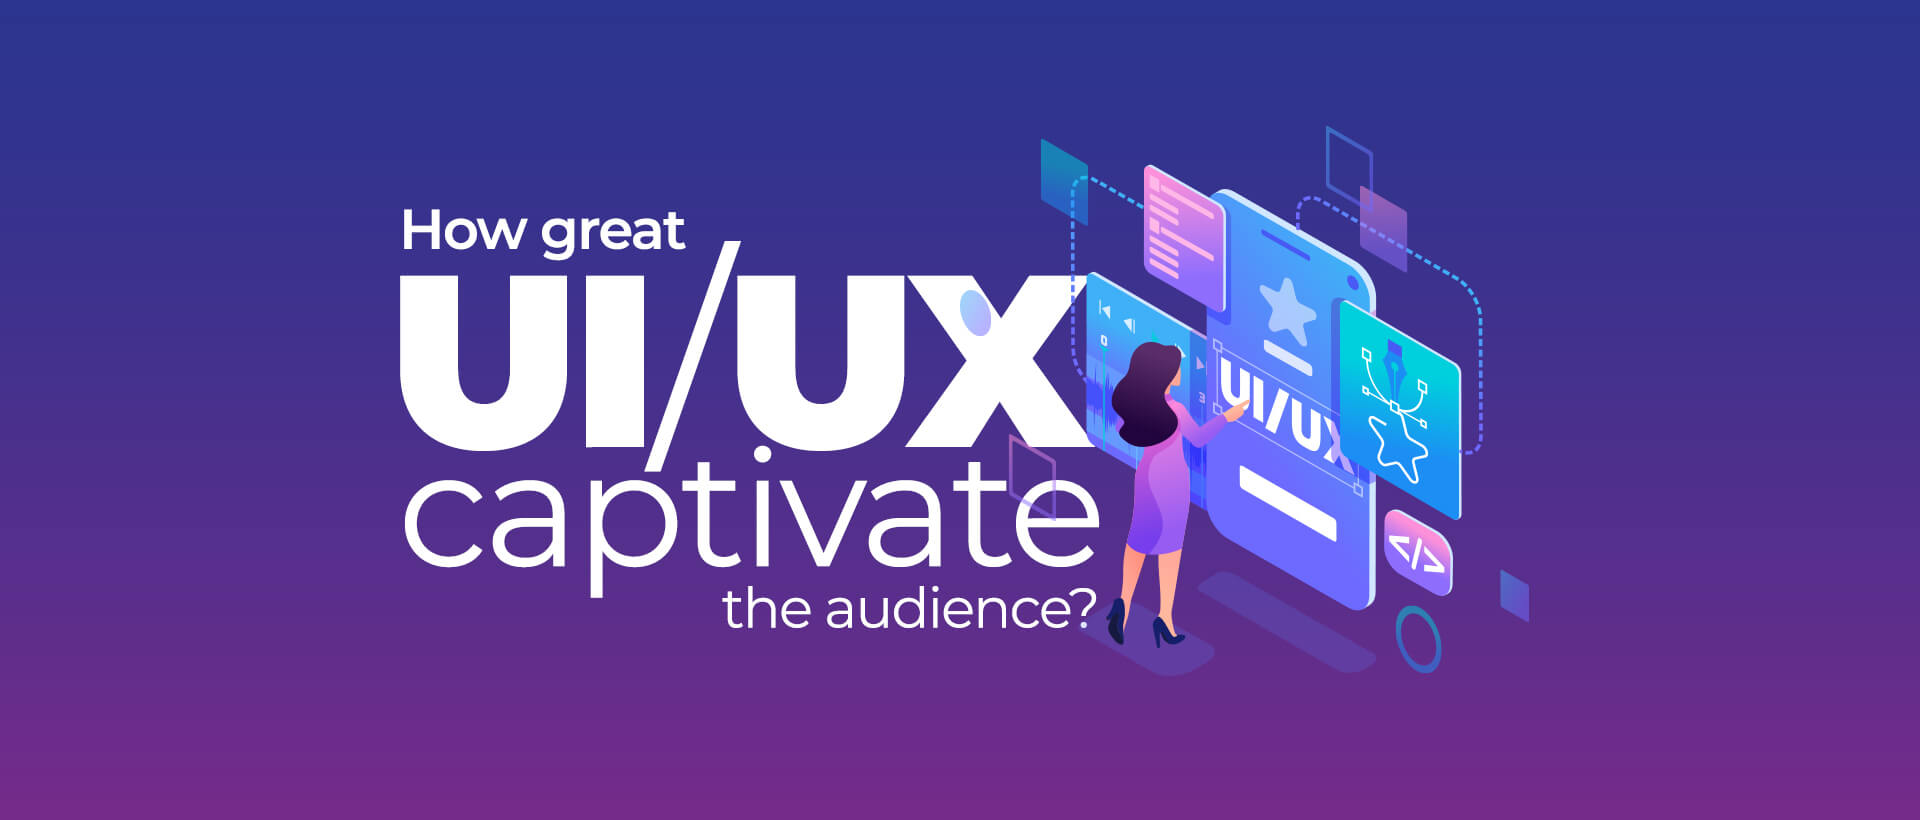 How great UI/UX captivate the audience?